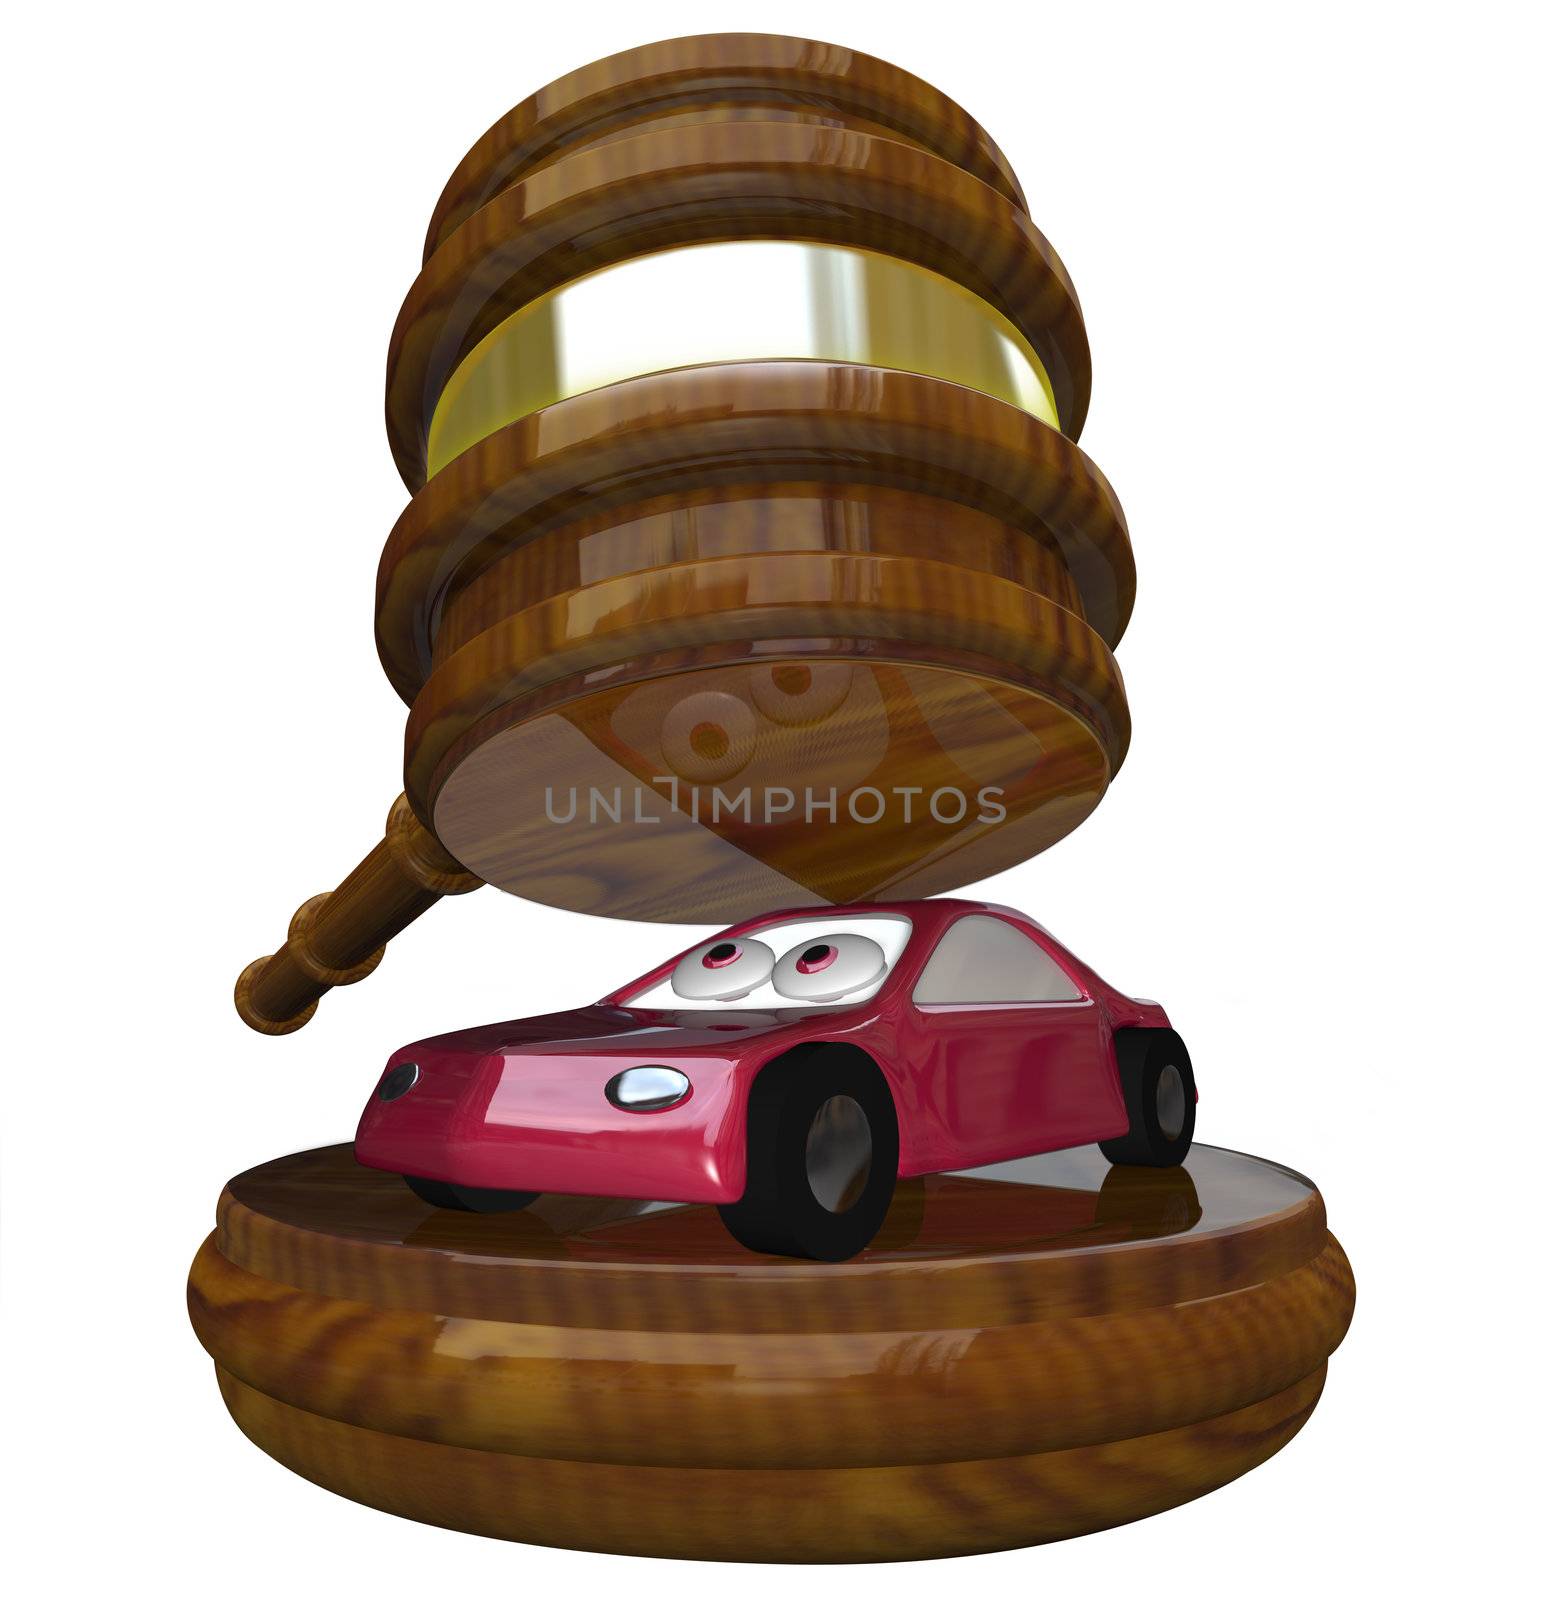 A red 3d illustration of a car under a gavel symbolizing someone who has gone bankrupt or fallen behind on payments and is losing a vehicle to being reposessed or seized as part of a court settlement